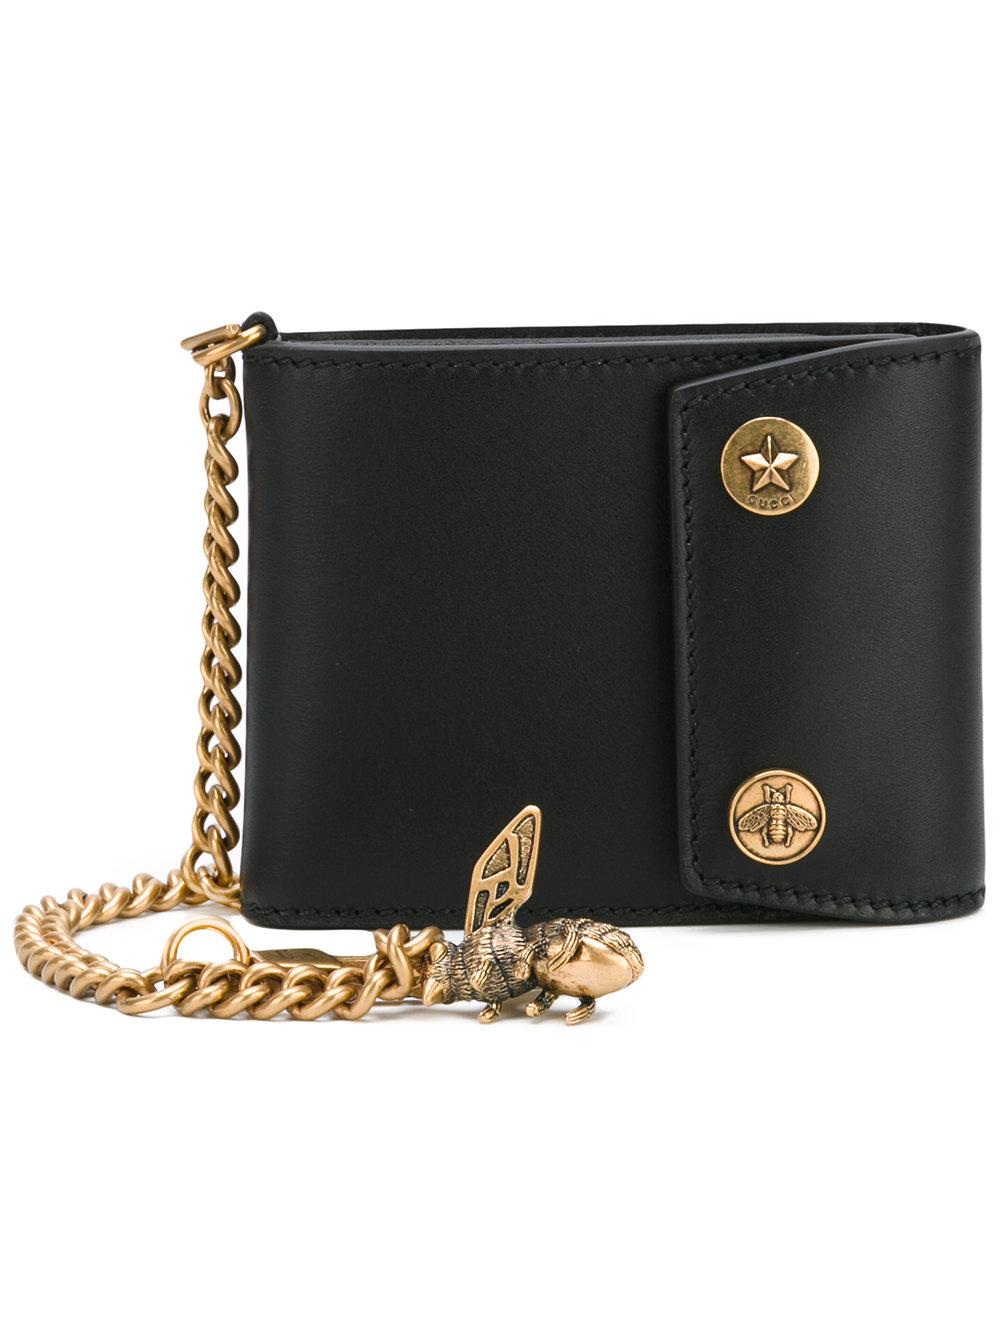 Gucci Chain And Bee Wallet in Black for Men - Lyst